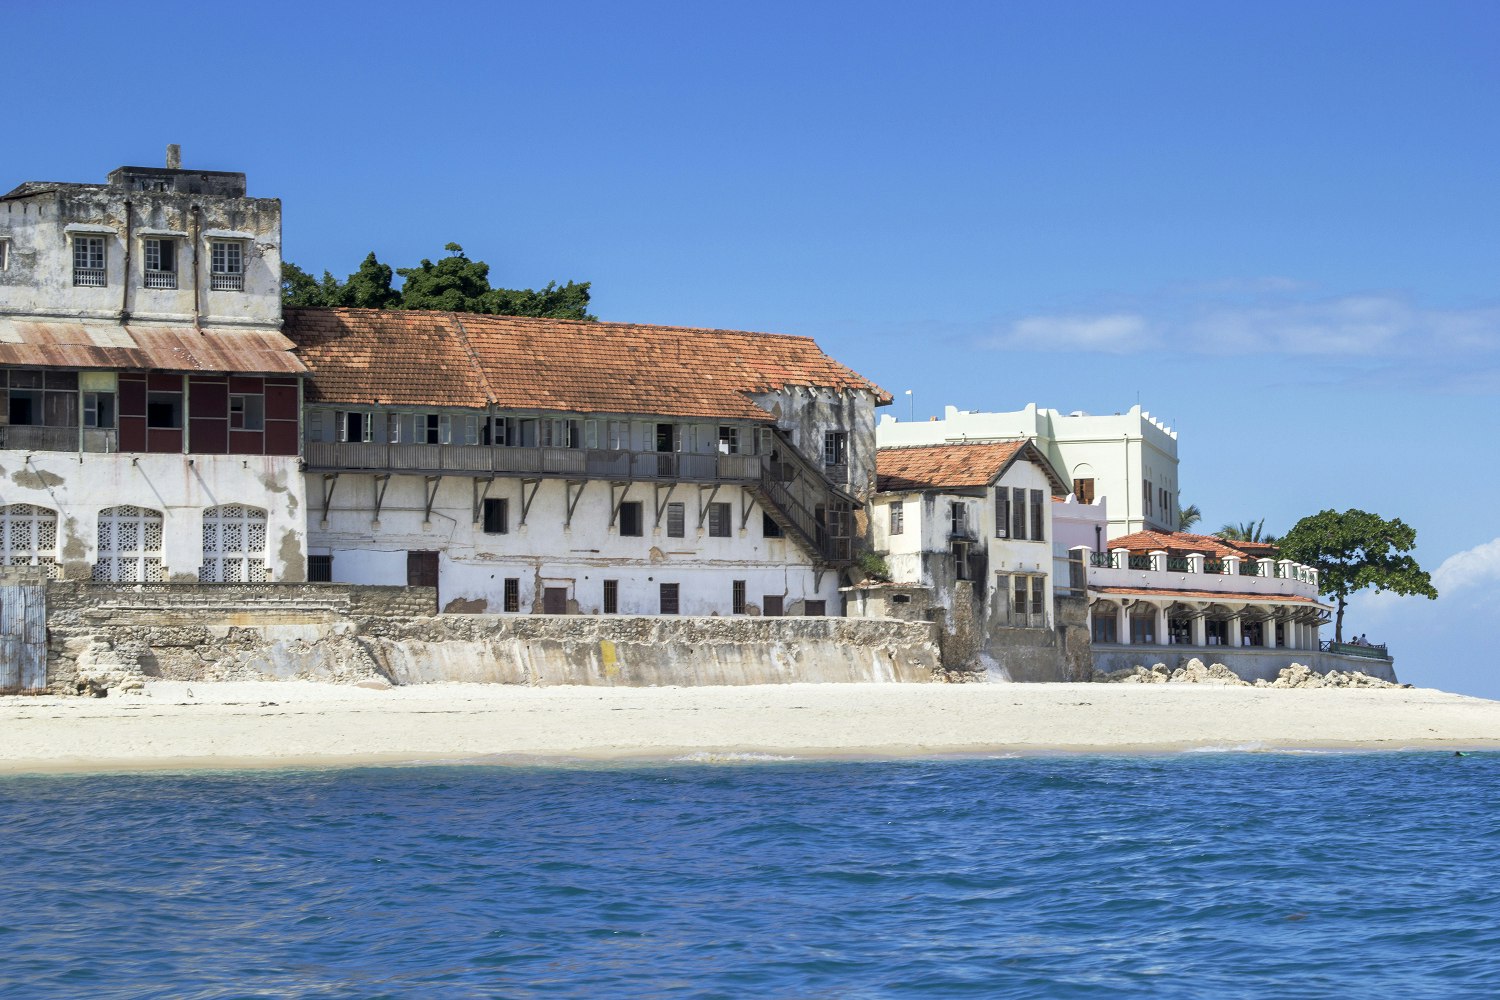 Features - View on old buildings of Stone Town, Zanzibar Tanzania, at waterfront